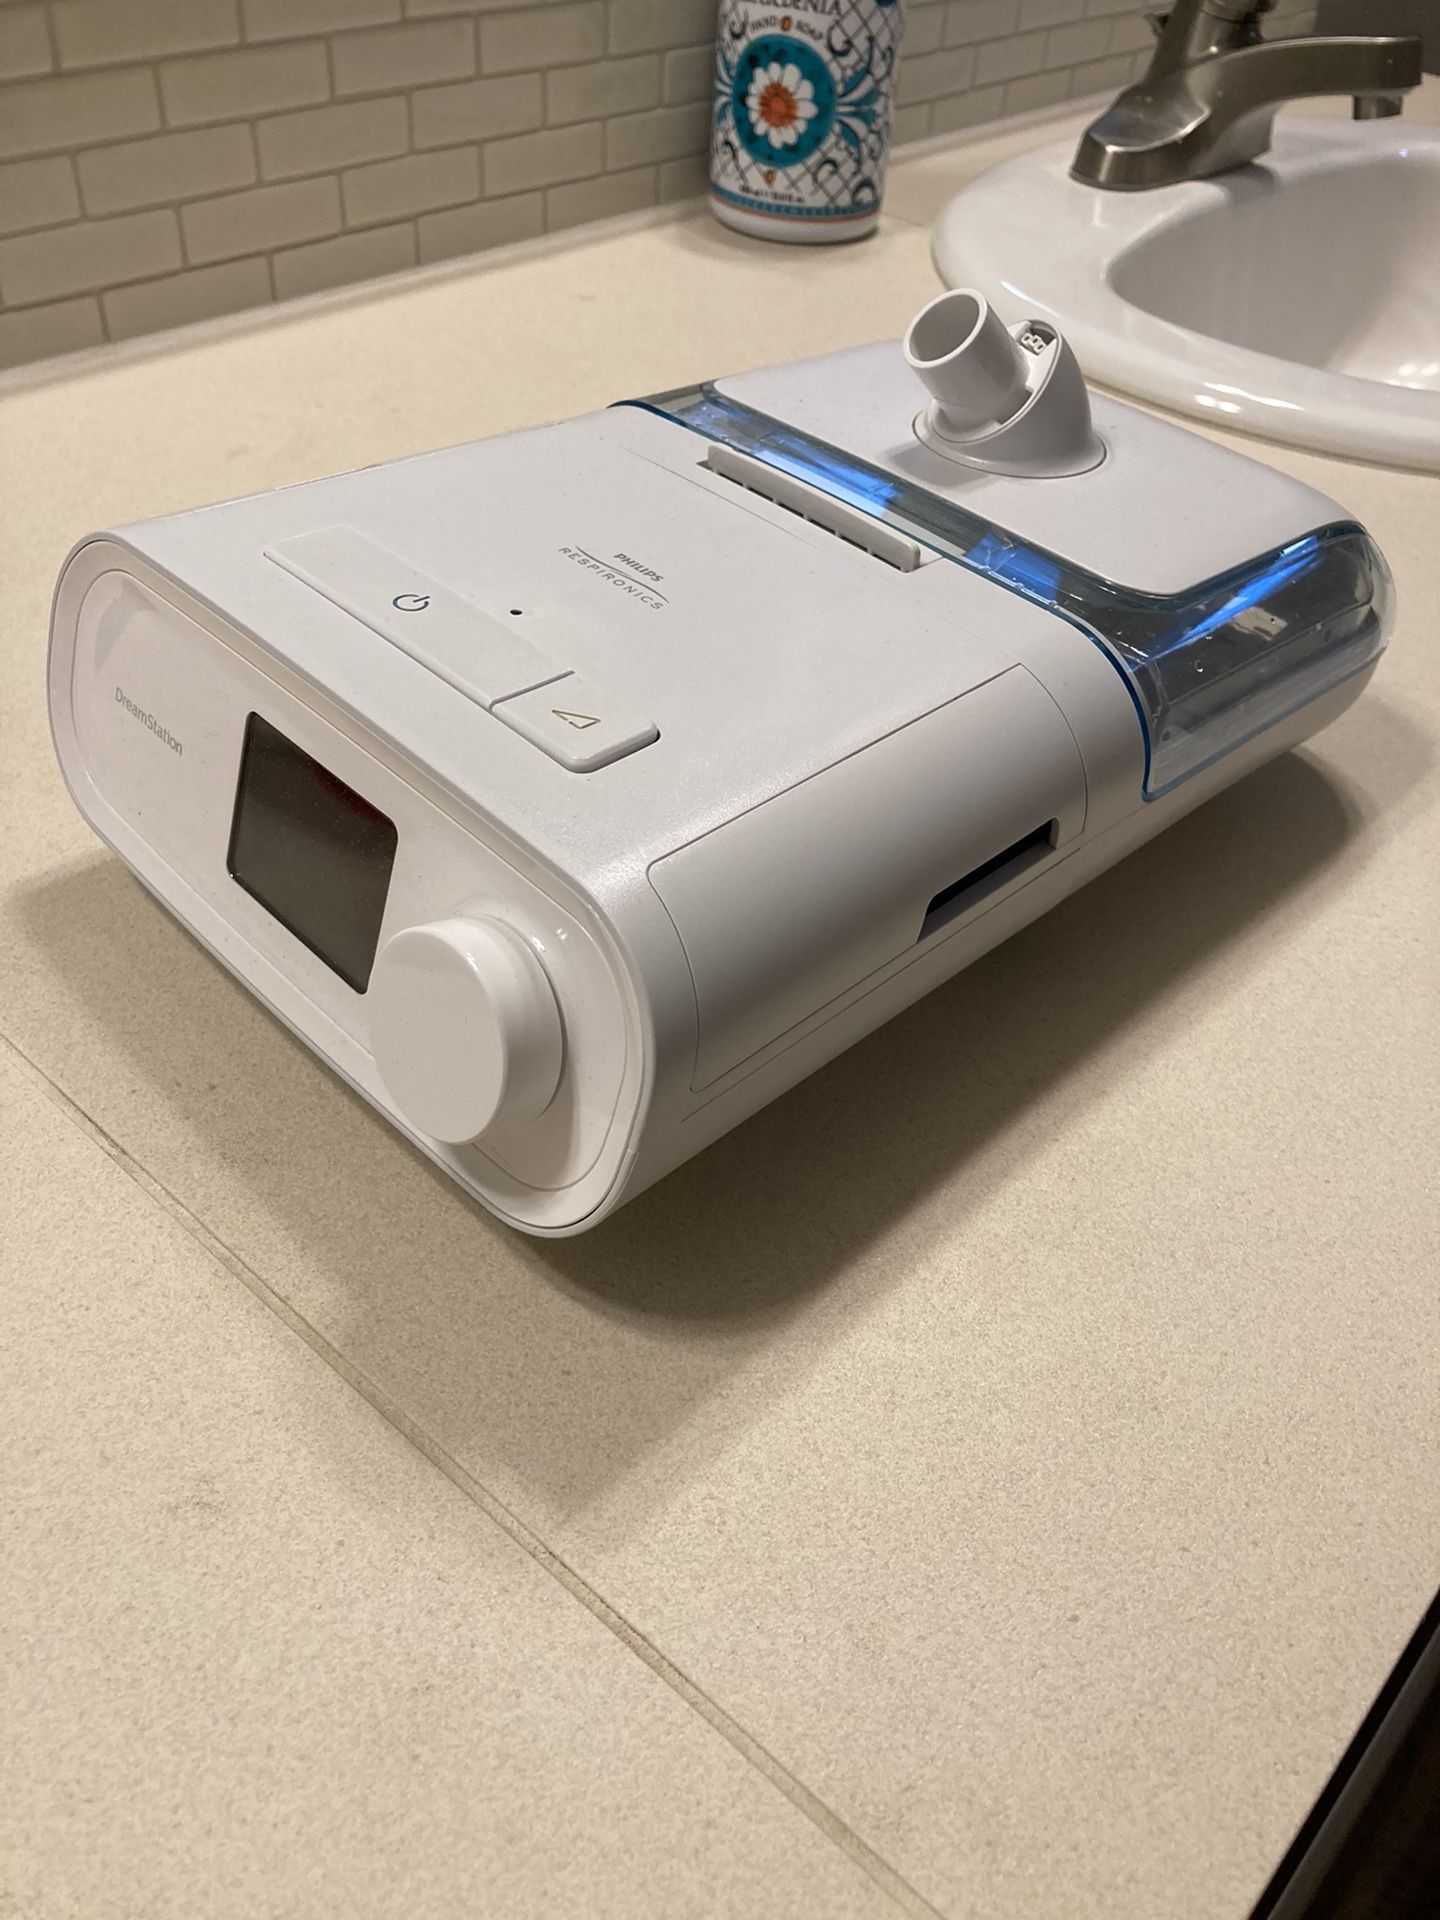 Phillips CPAP Machine And Supplies